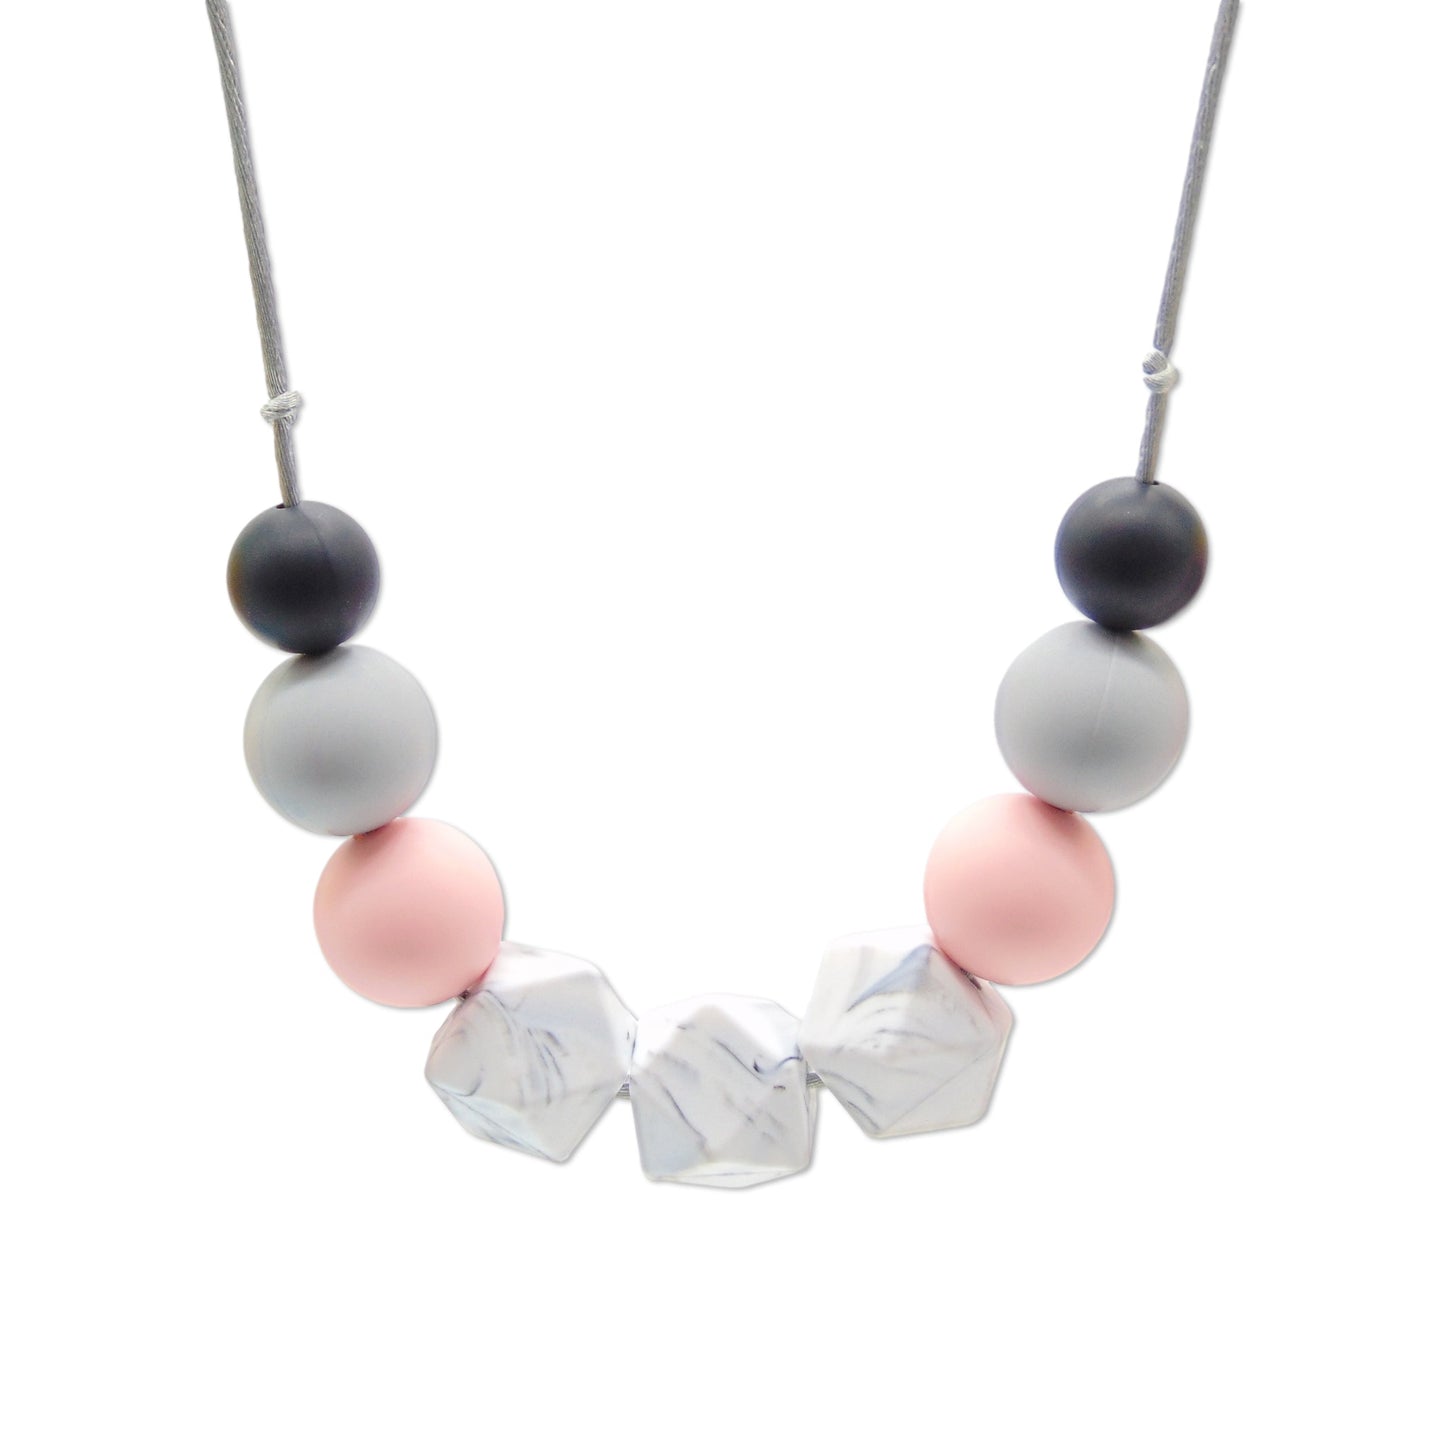 WAREHOUSE CLEARANCE Looking Blush - 9 Bead Necklace